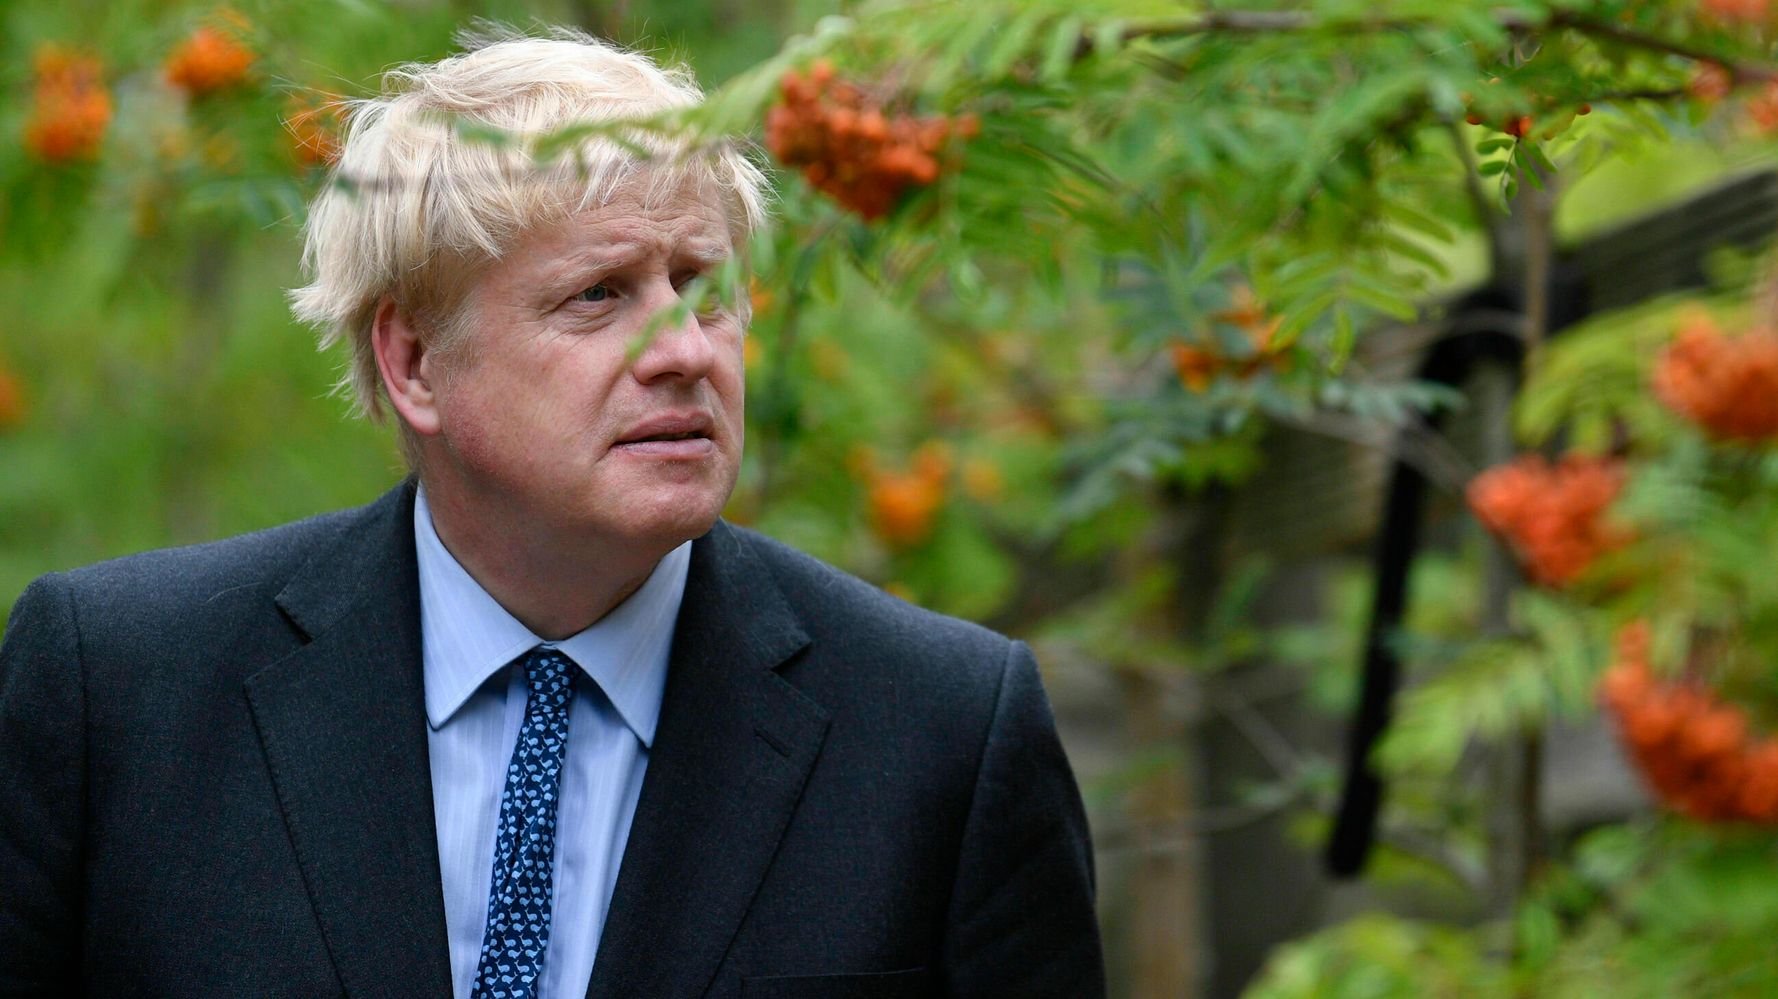 Boris Johnson Swerves Questions Over £150,000 Tree House In Tetchy Exchange